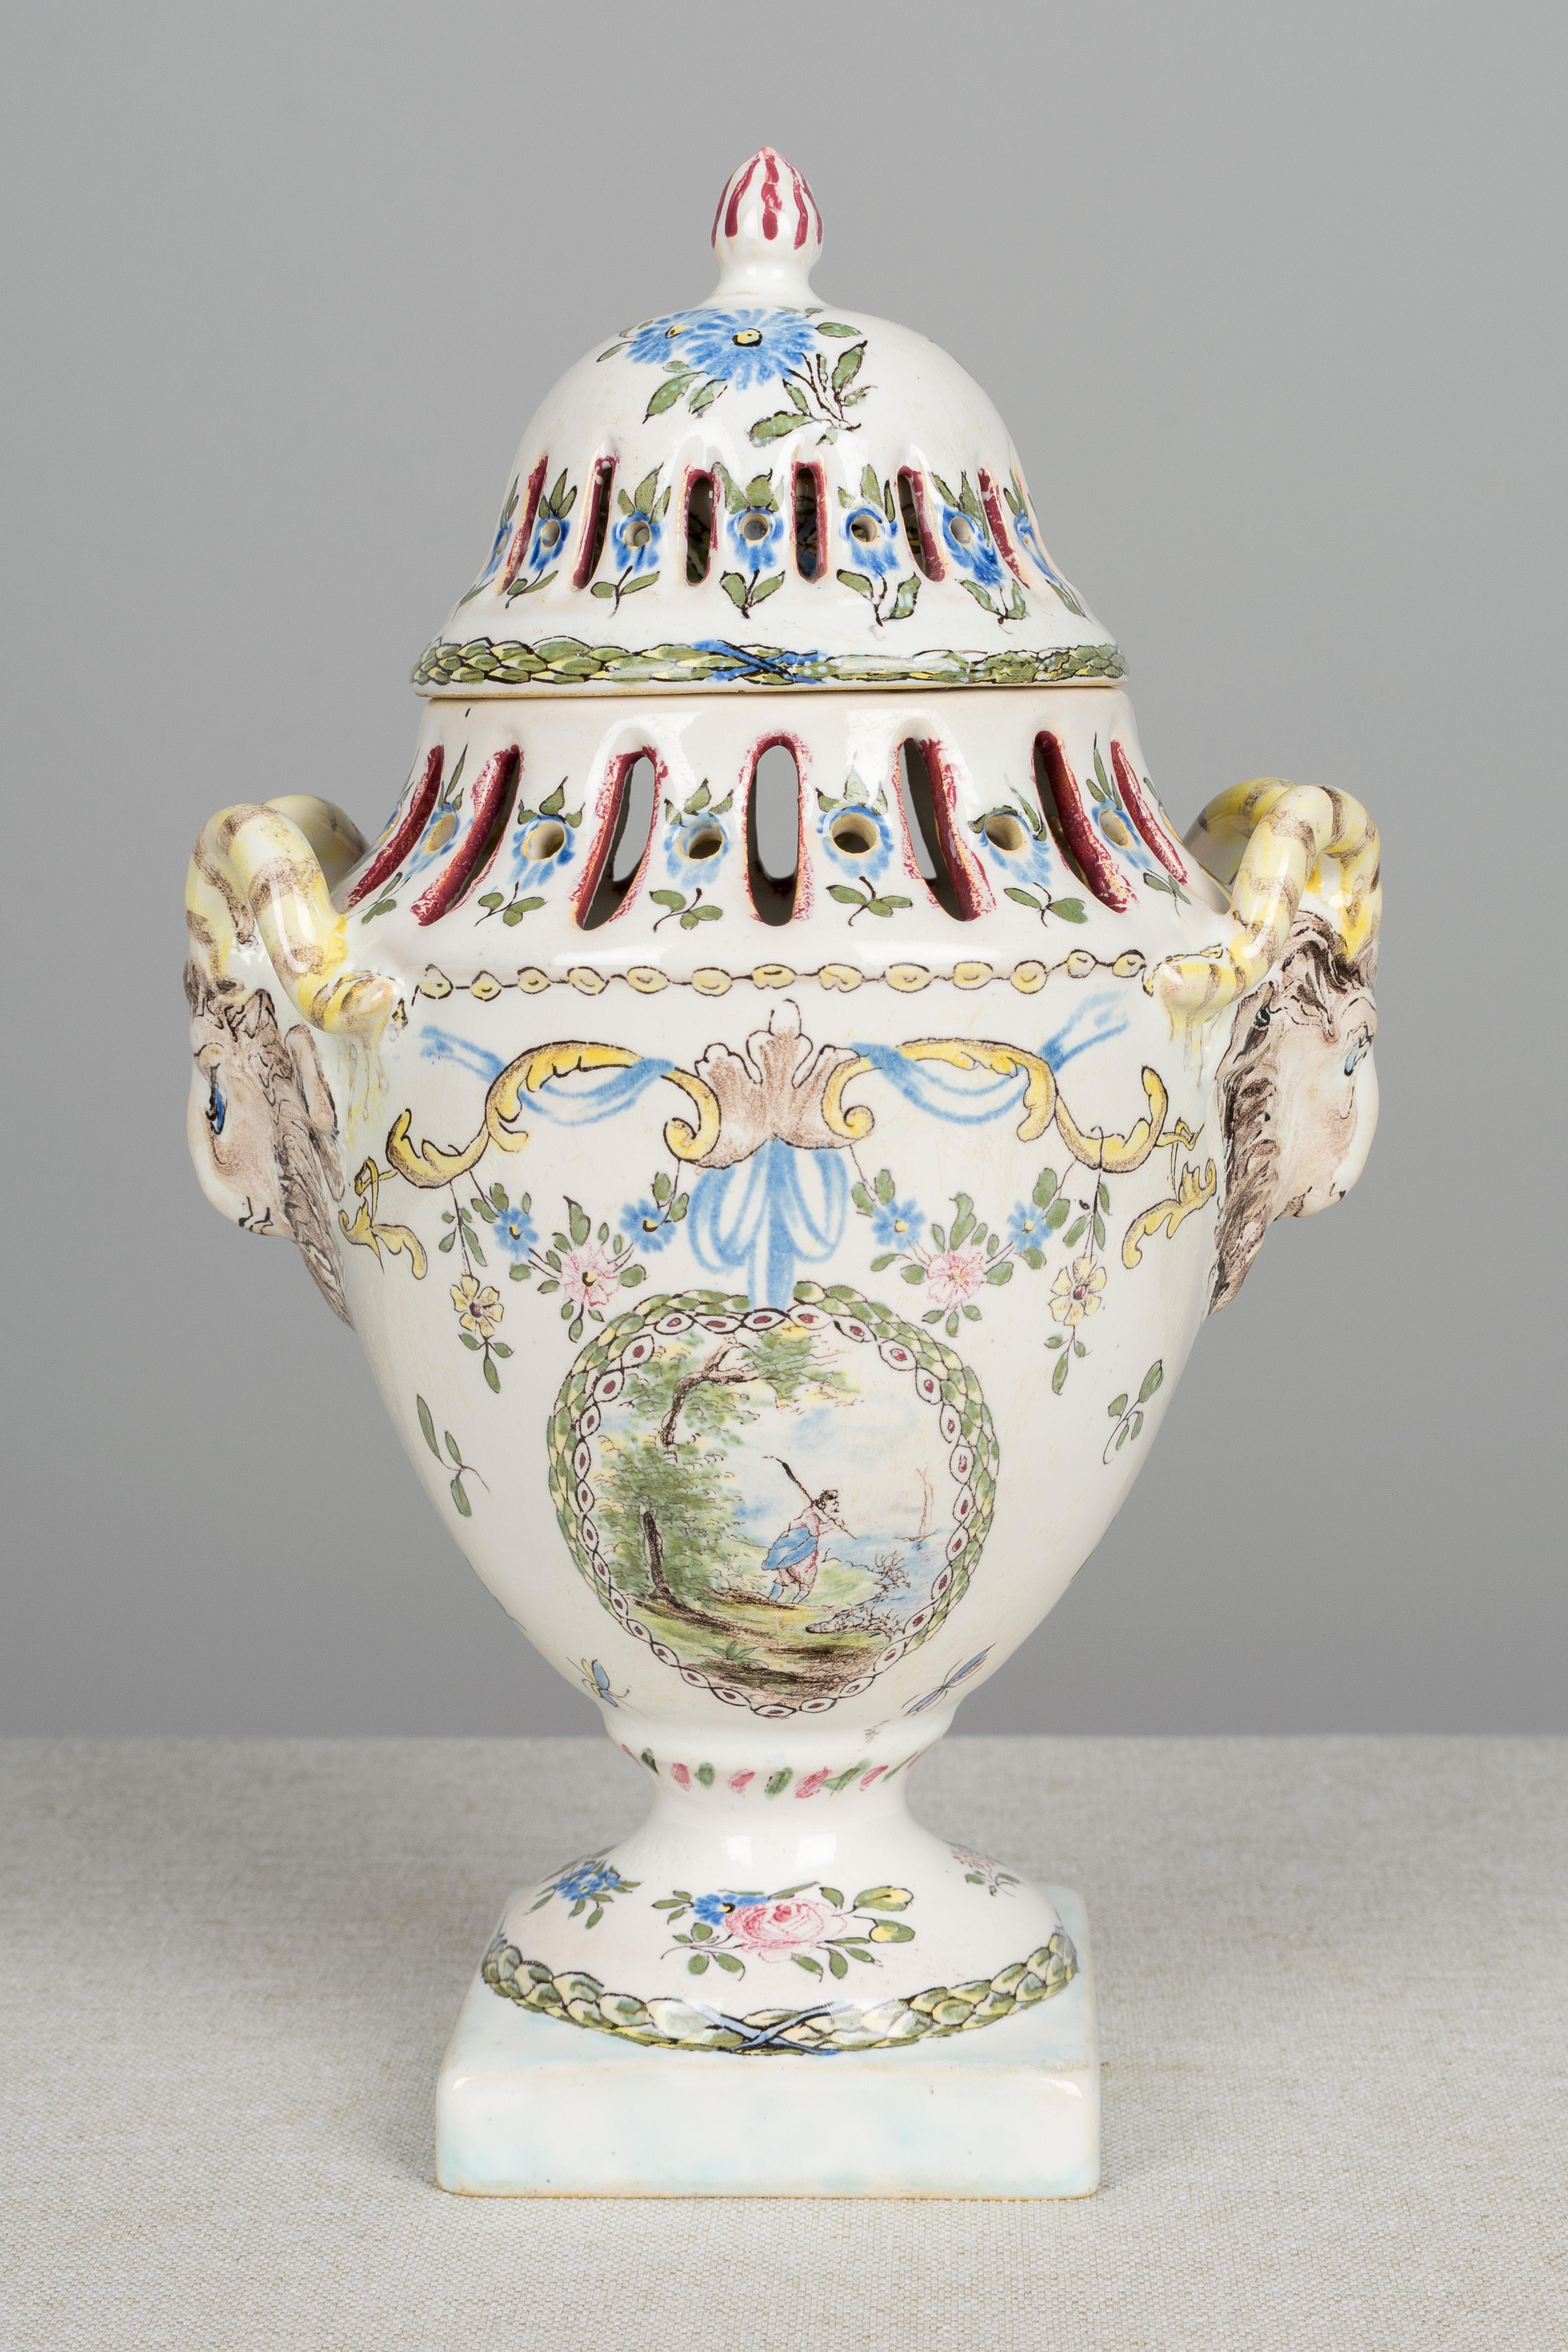 An 18th century French faience potpourri urn with a pierced fitted lid, through which scent may slowly diffuse. Lovely delicate hand painted floral decoration in pastel pink, blue, green and yellow. Whimsical sculpted ram heads form the handles. One